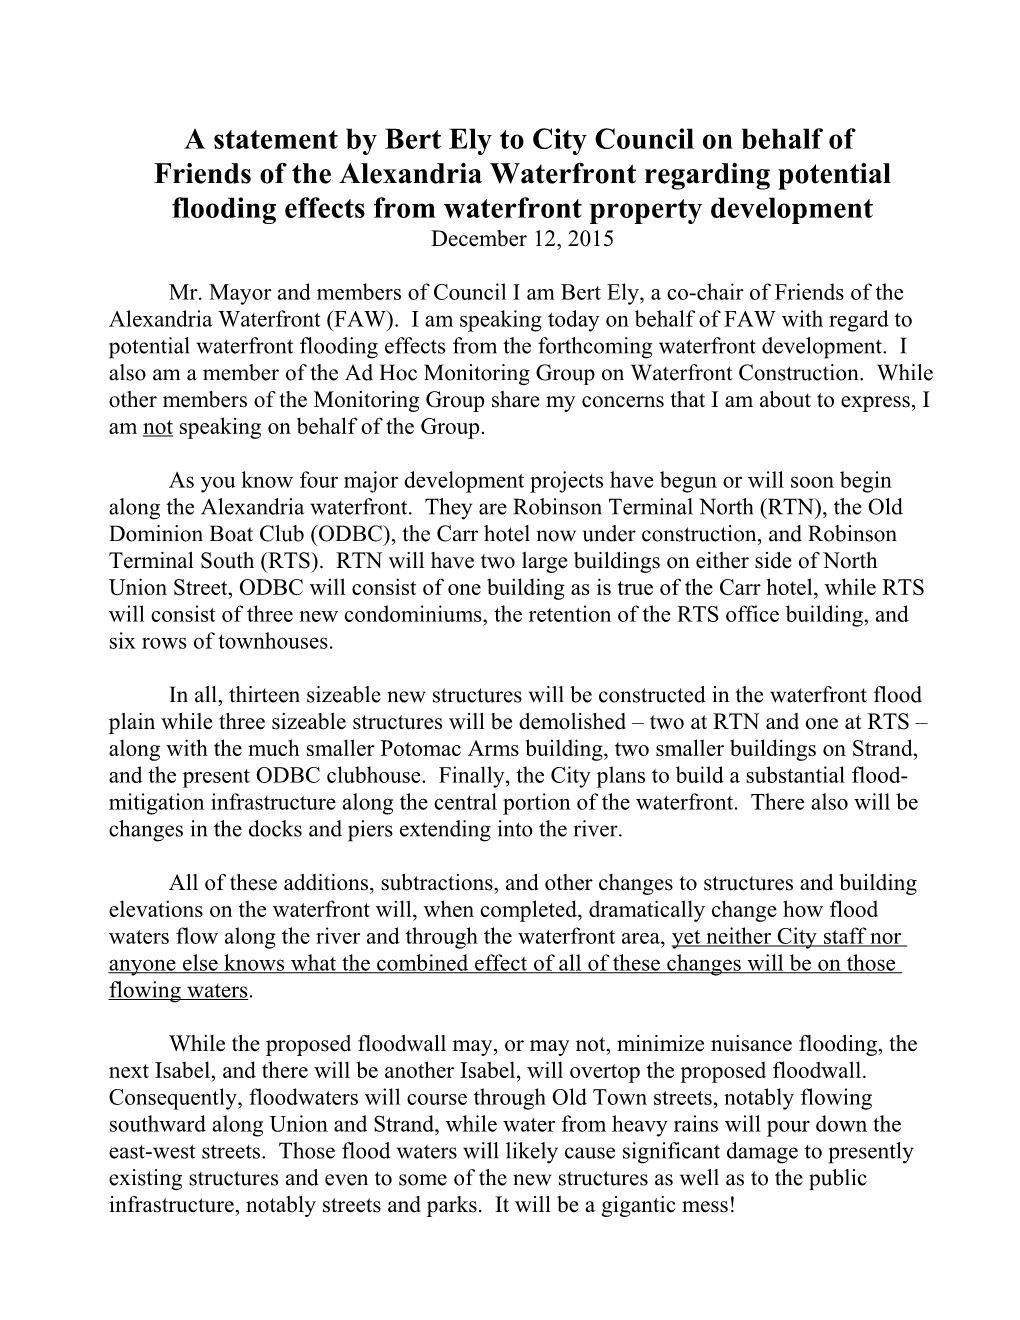 A Statement by Bert Ely to the Alexandria Planning